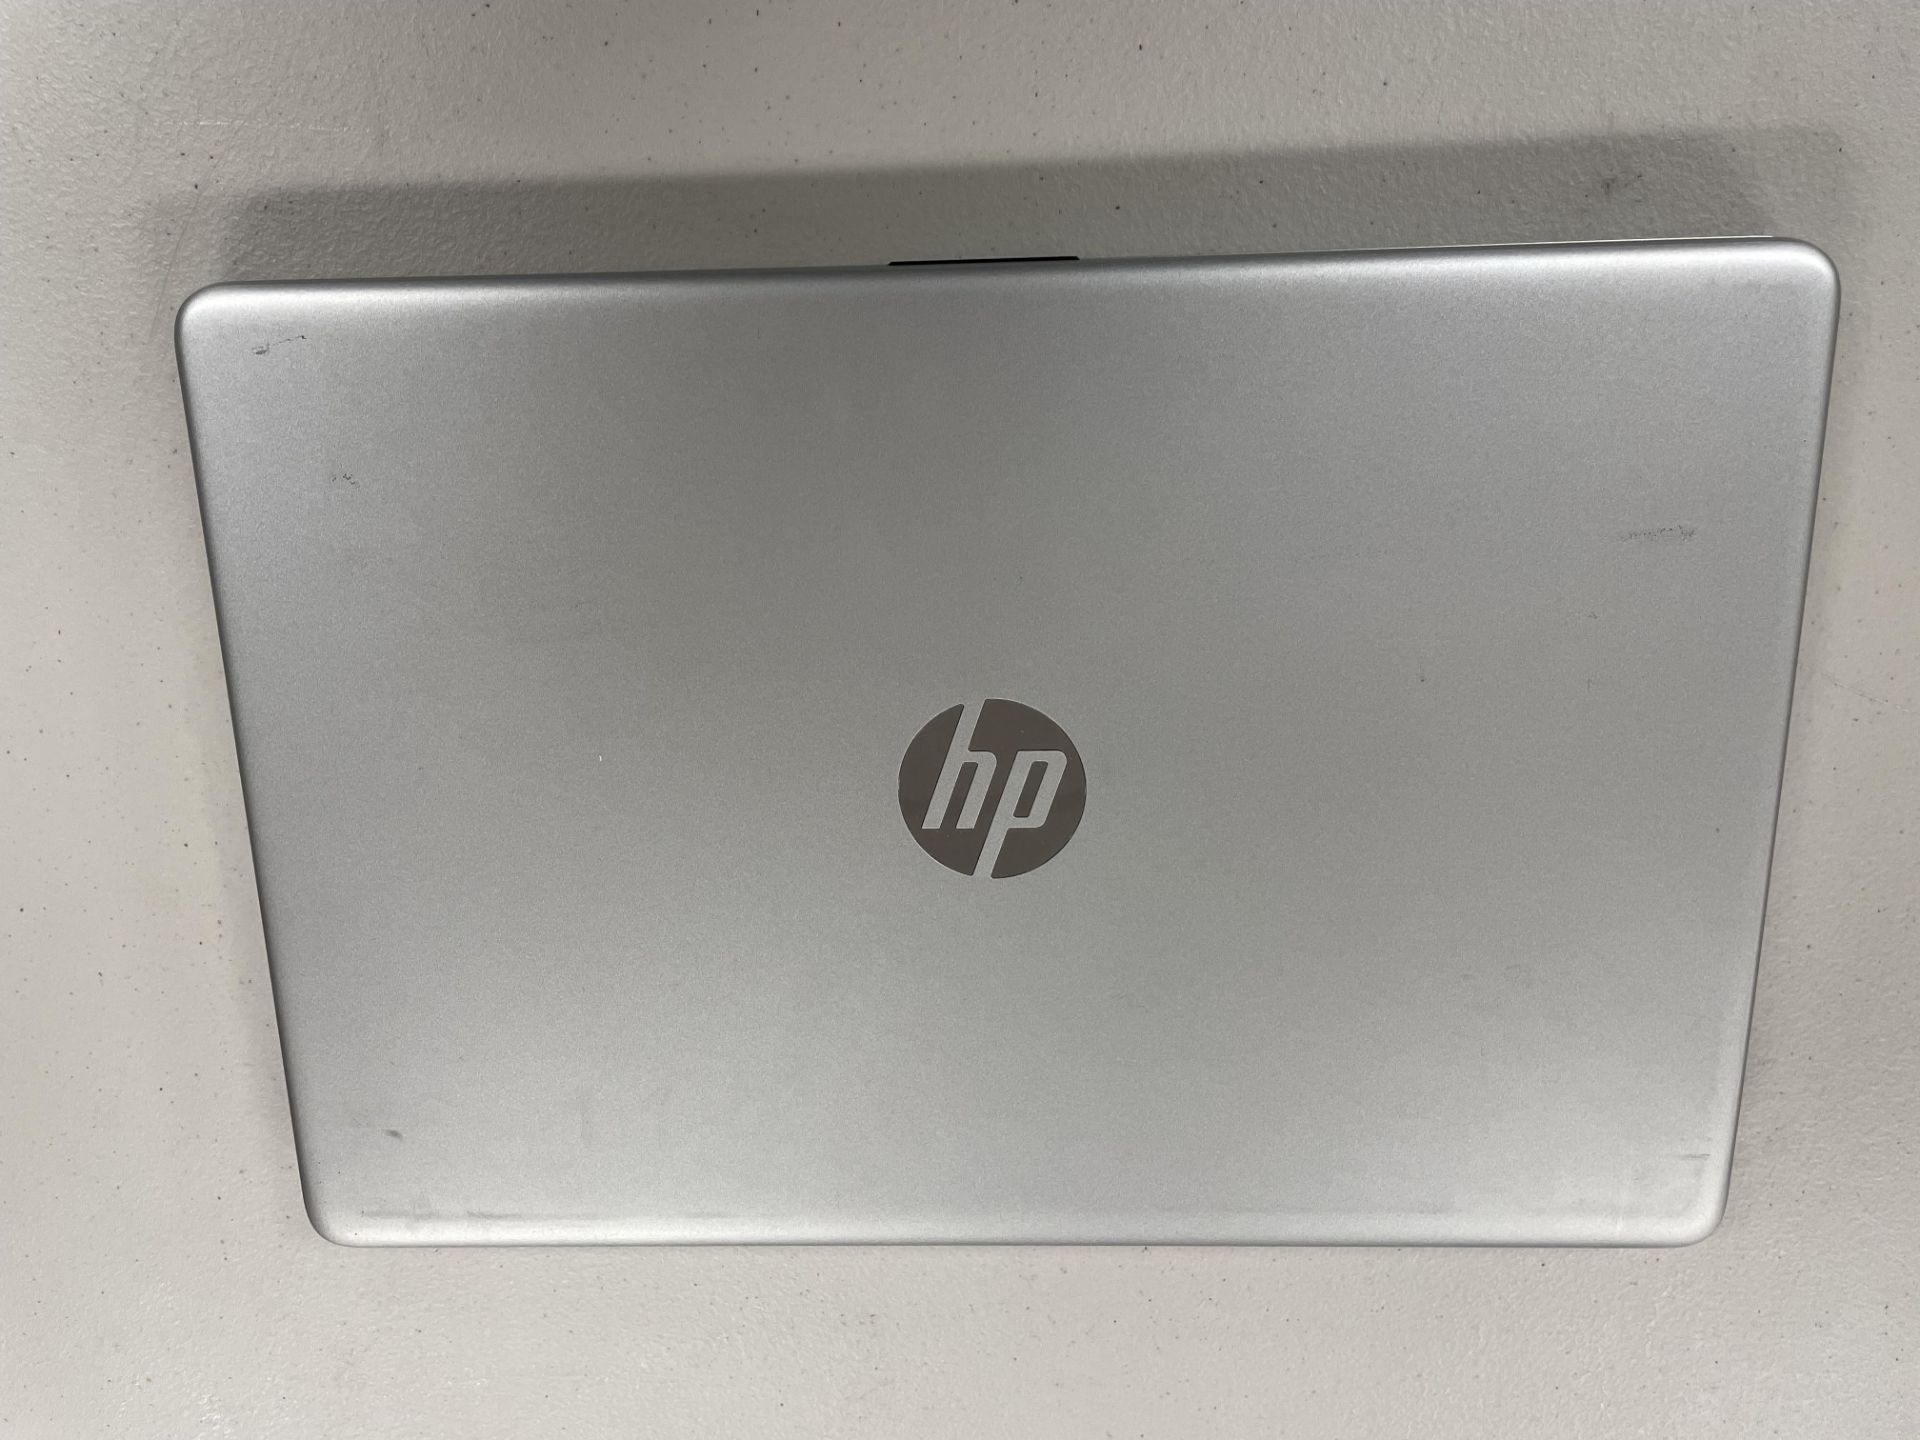 HP Core i5 10th Generation Laptop. Model 15T-DY100 w/ Power Supply - Image 2 of 2